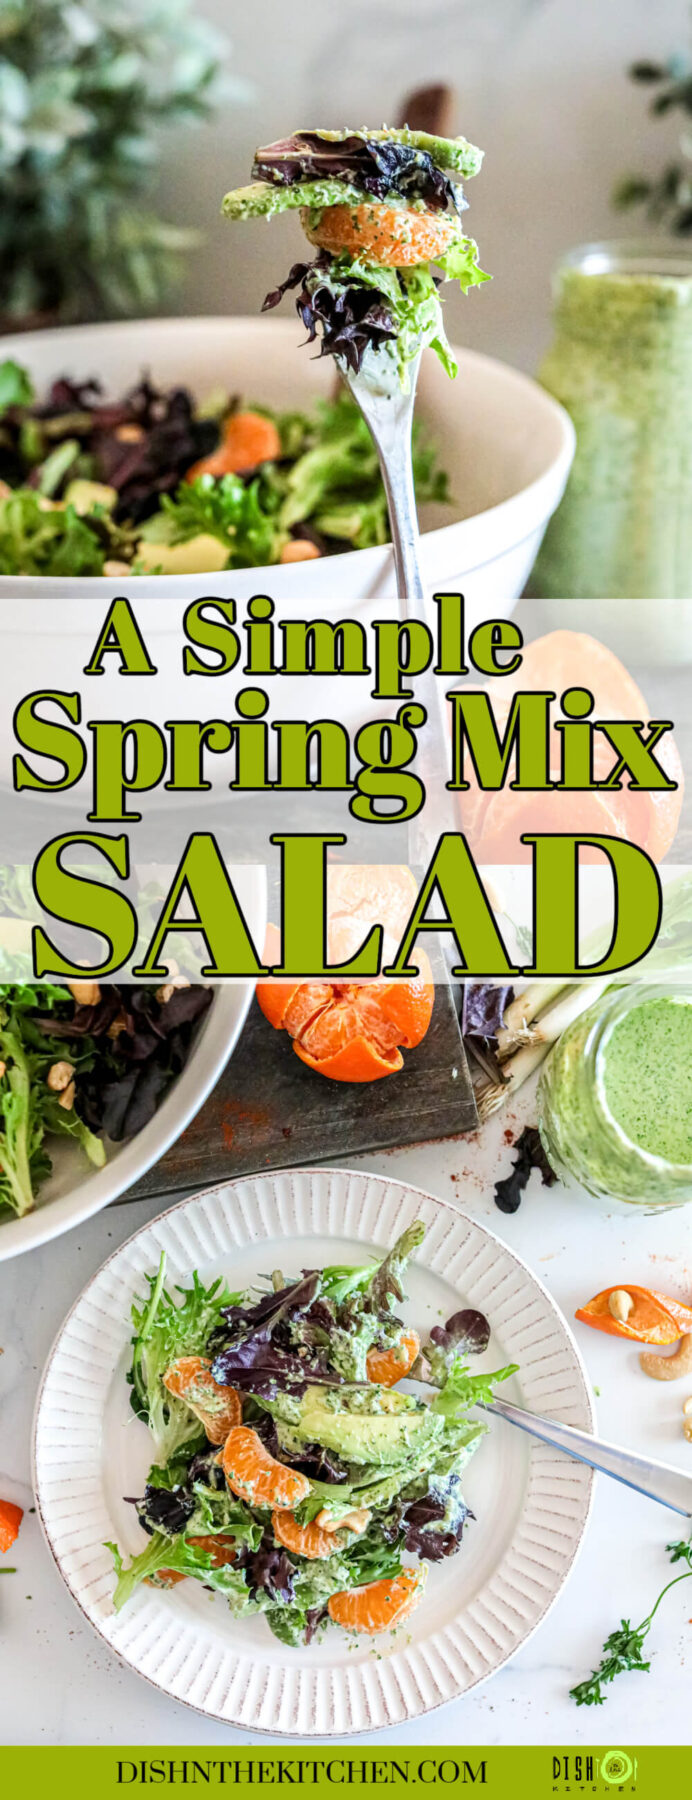 Pinterest image featuring a colourful Spring Mix Salad with Green Goddess Dressing on a white plate.